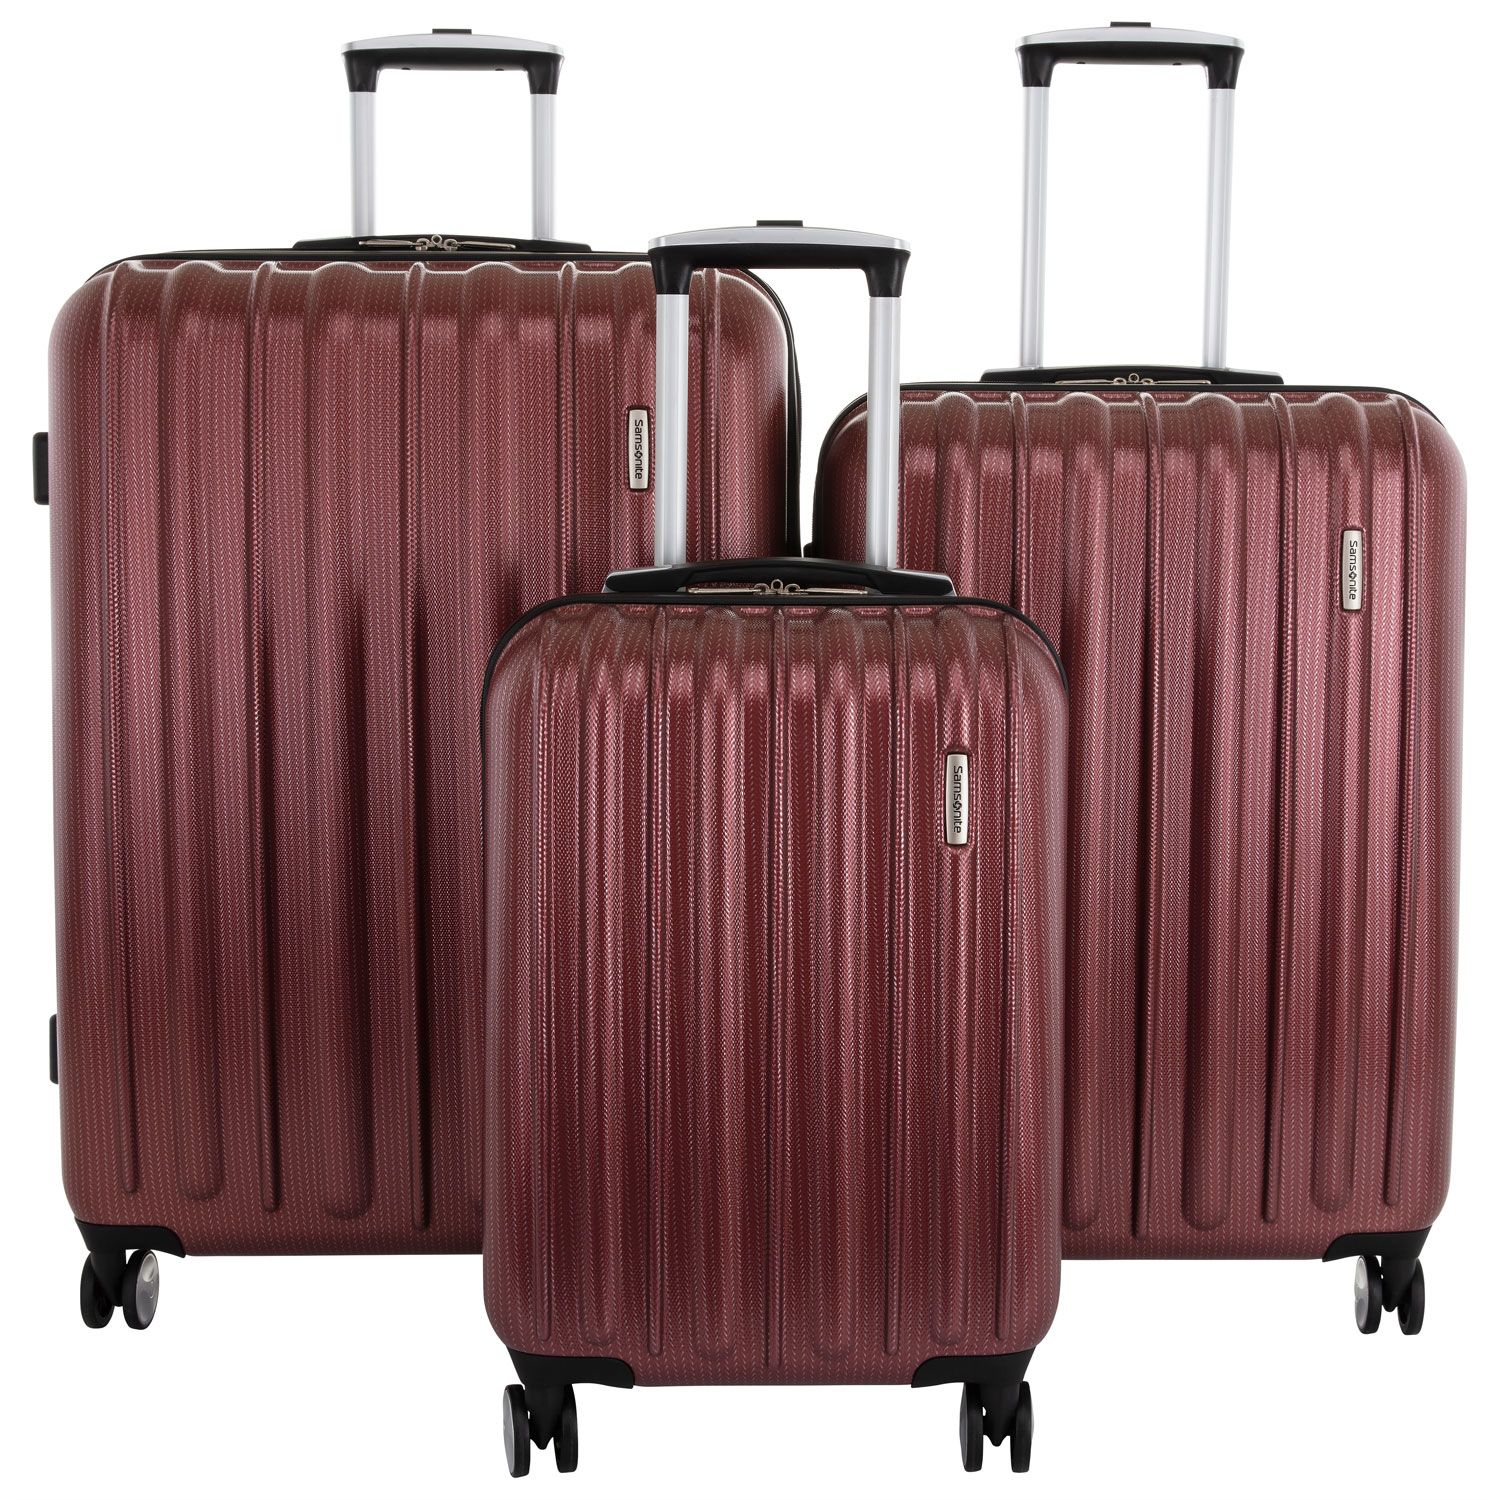 Samsonite Quarry 3-Piece Hard Side Expandable Luggage Set - Red - Only at Best Buy